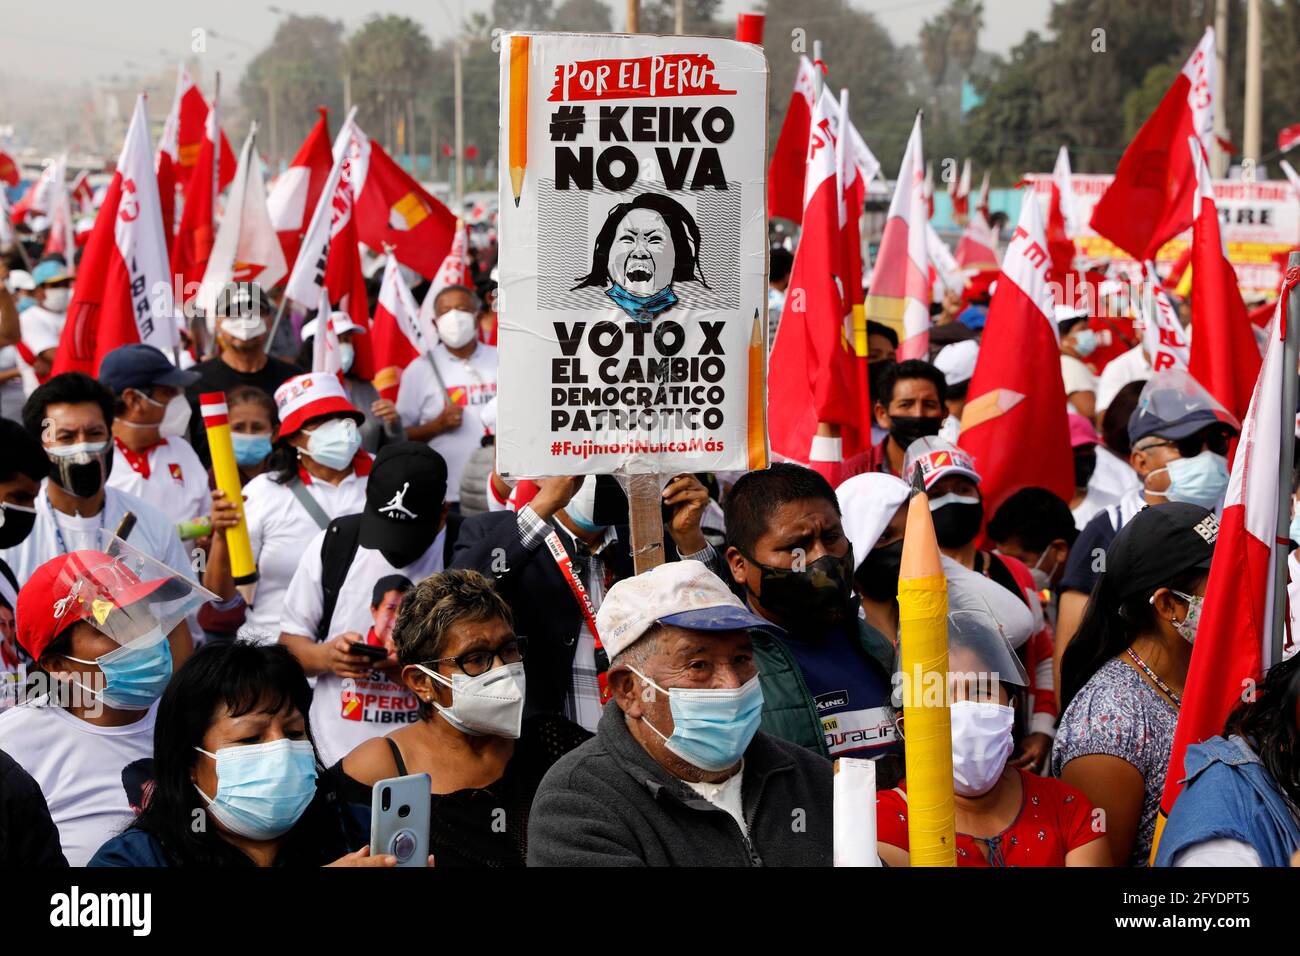 Lima, Peru. 26th May, 2021. People holding a poster against Keiko Fujimori attend a campaign rally for Presidential candidate Pedro Castillo, in Villa El Salvador neighborhood. On June 6 Peruvians will go to the polls to elect new President between Castillo and Keiko Fujimori. Credit: Mariana Bazo/ZUMA Wire/Alamy Live News Stock Photo